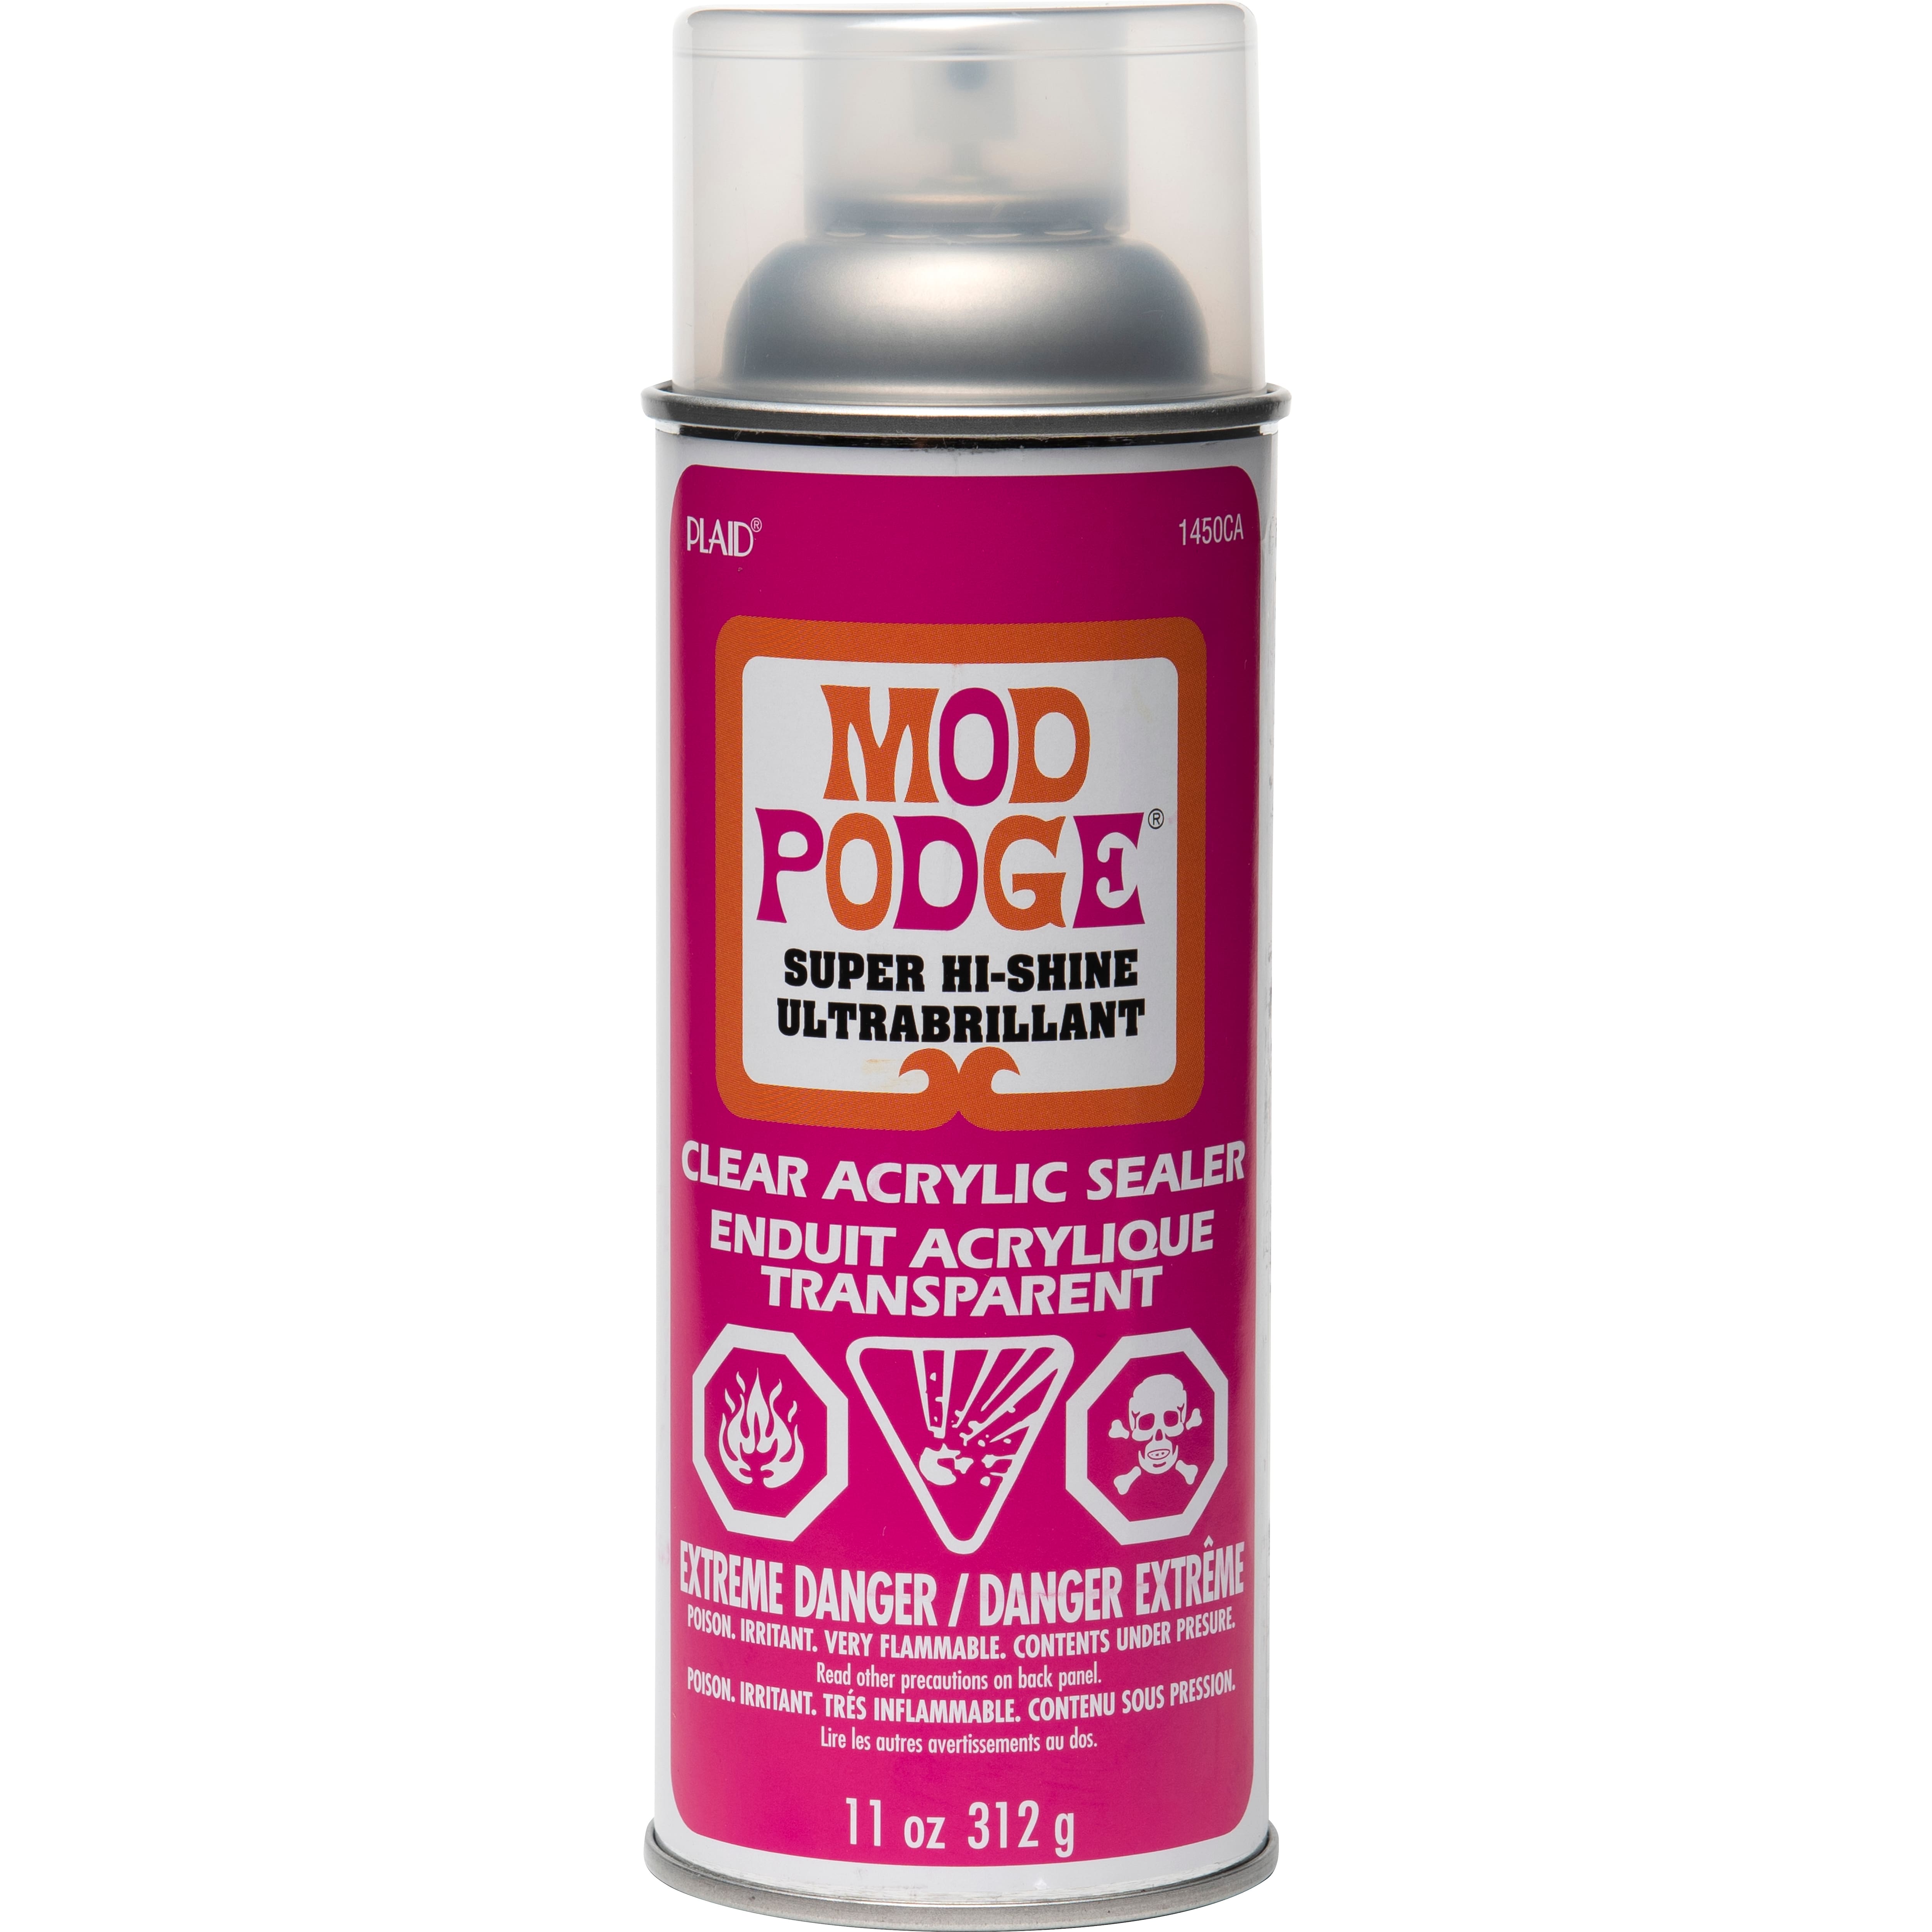 Mod Podge Spray Acrylic Sealer That is Specifically Formulated to